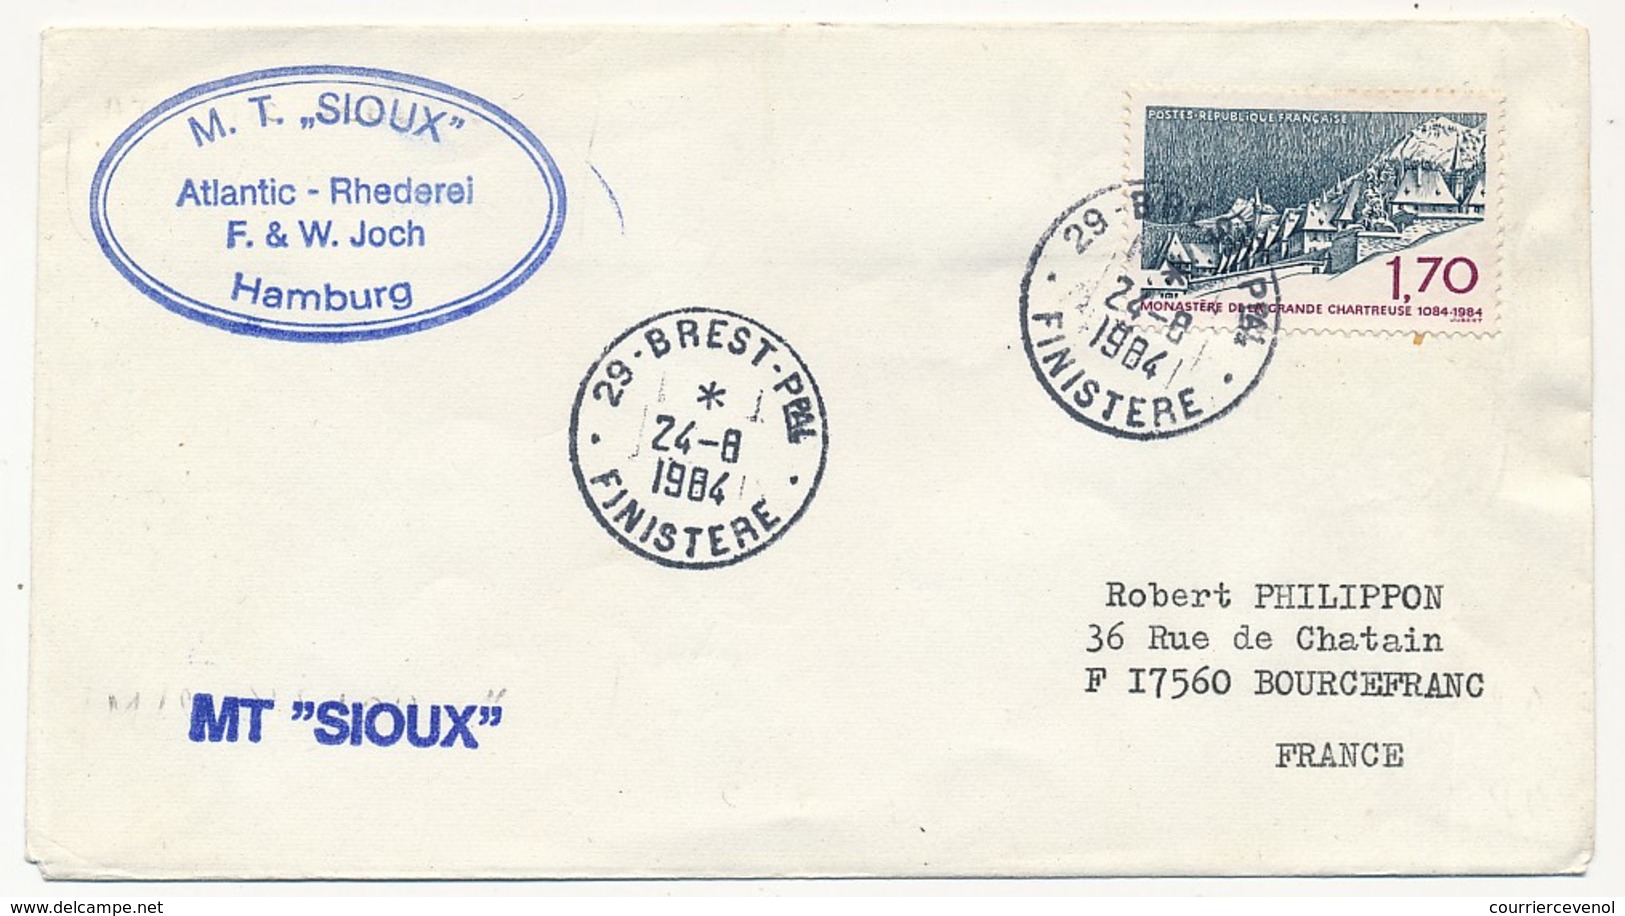 FRANCE - 1,70 Grande Chartreuse Obl 29 Brest Ppal 1984 + M.T. SIOUX Hambourg - Maritime Post